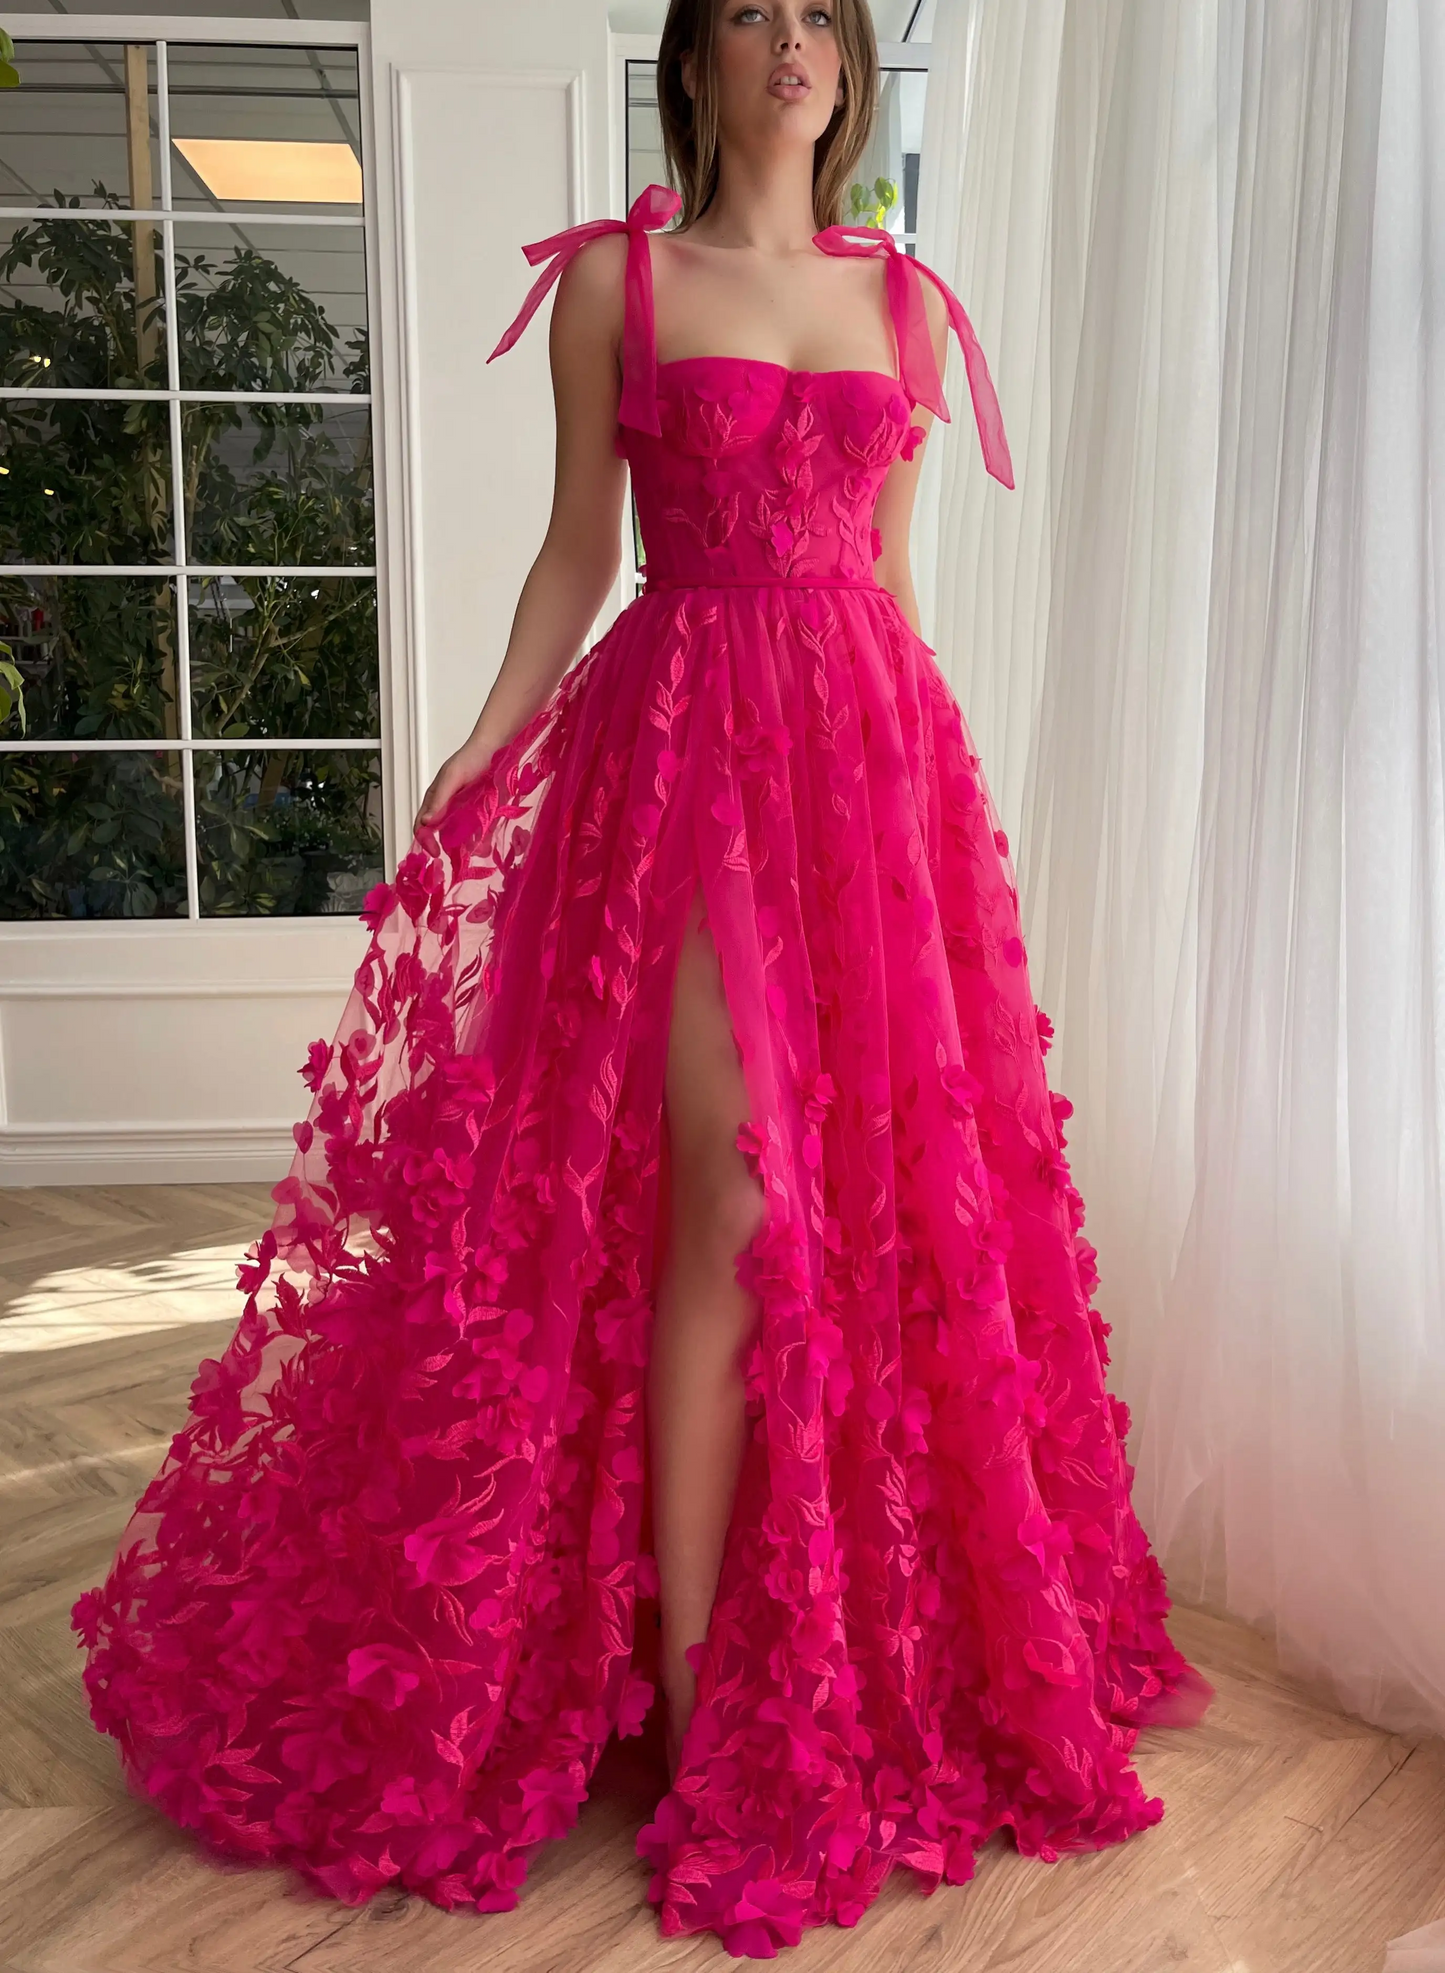 Teen's Tulle A-line Prom Dresses Square Collar Bow Spaghetti Straps Backless High Split Party Dress 3D Appliques Homecoming Gown